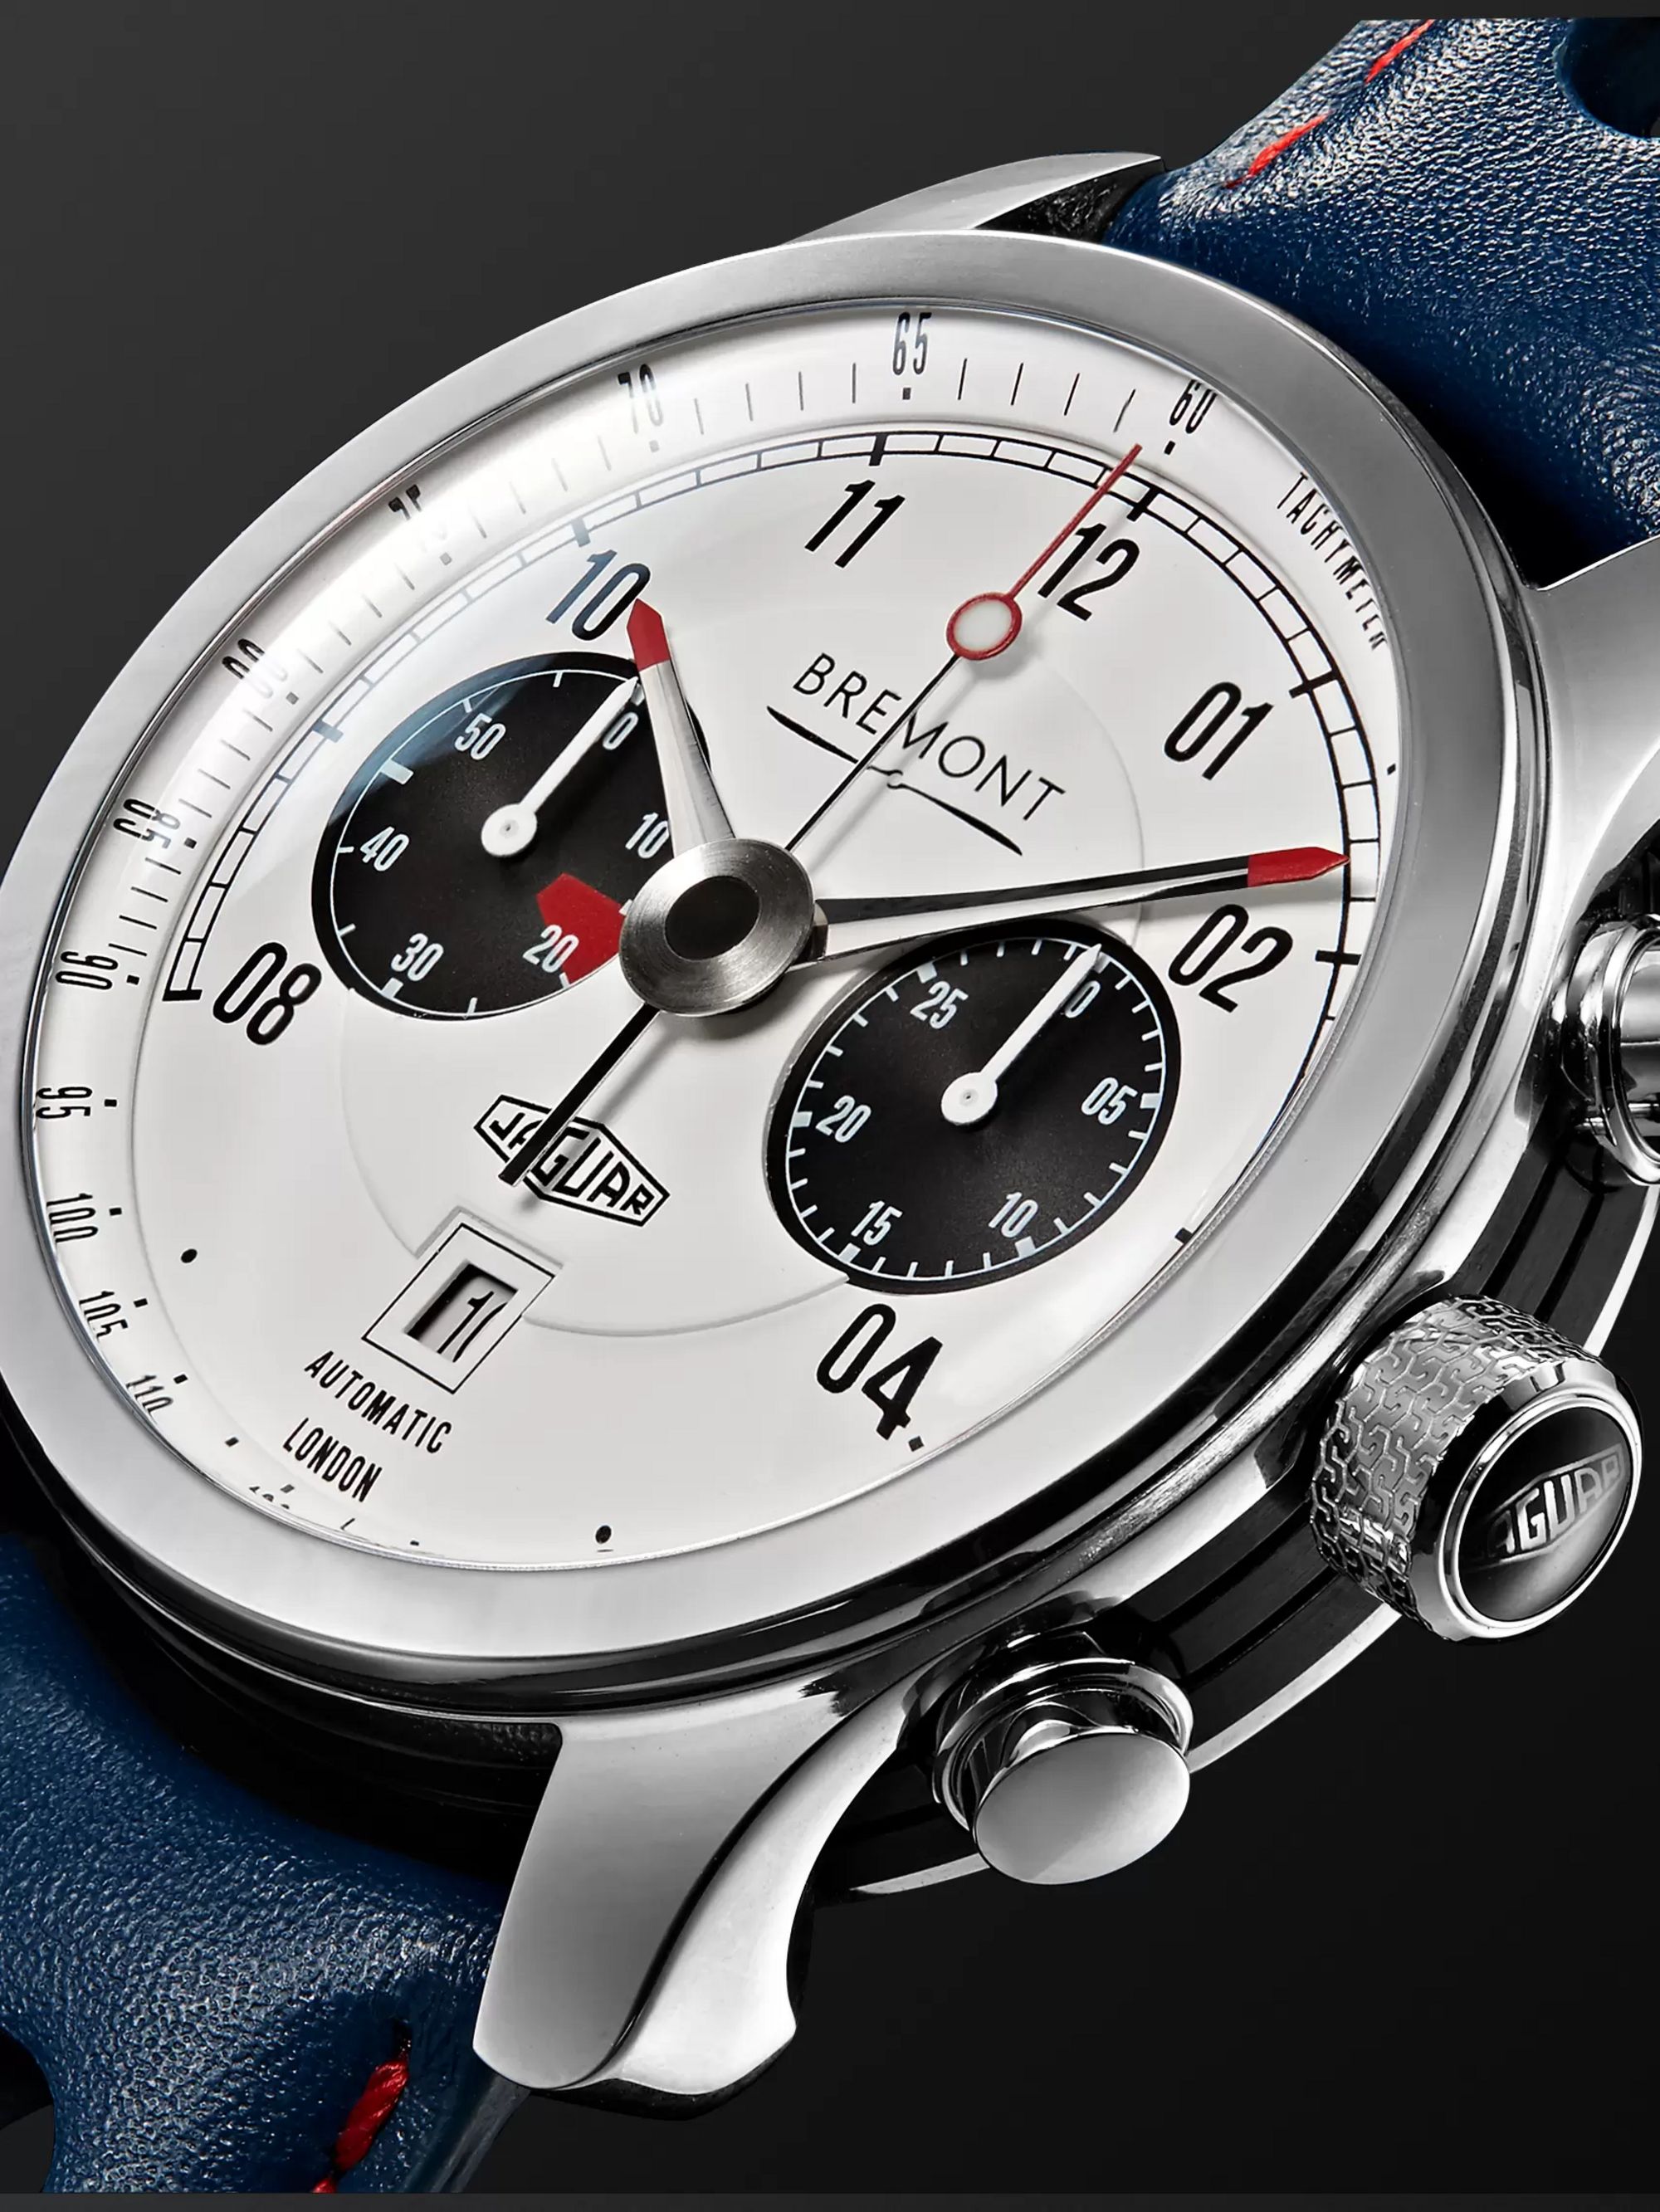 BREMONT Jaguar MKII Automatic Chronograph 43mm Stainless Steel and Leather Watch, Ref. No. J-MKII-WH-R-S